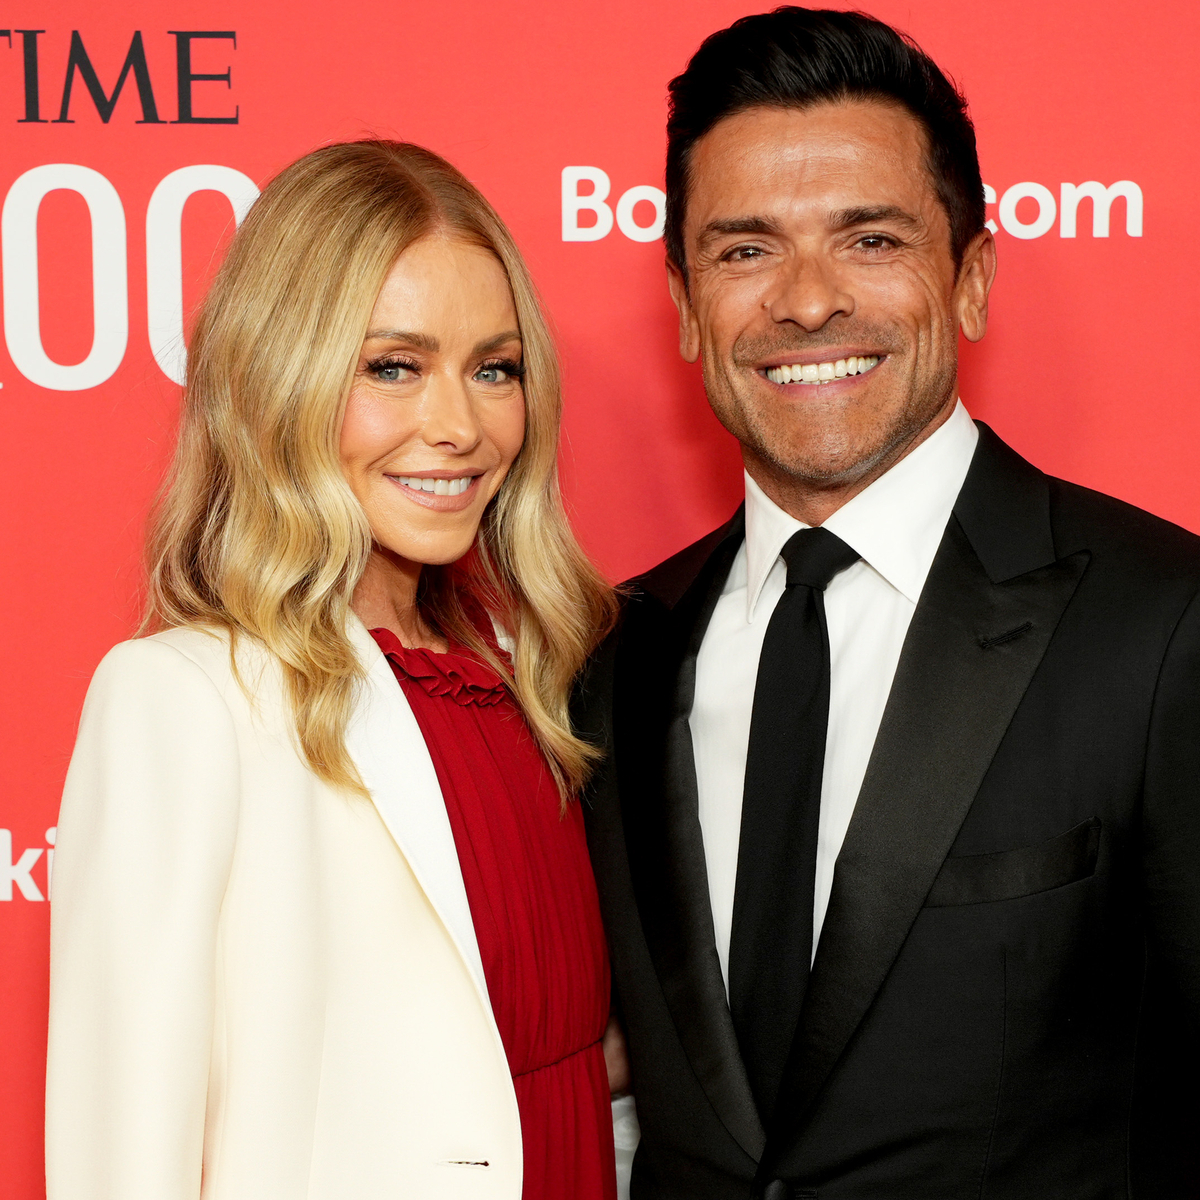 Kelly Ripa and Mark Consuelos Share Why Working Together Has Changed Their Romance